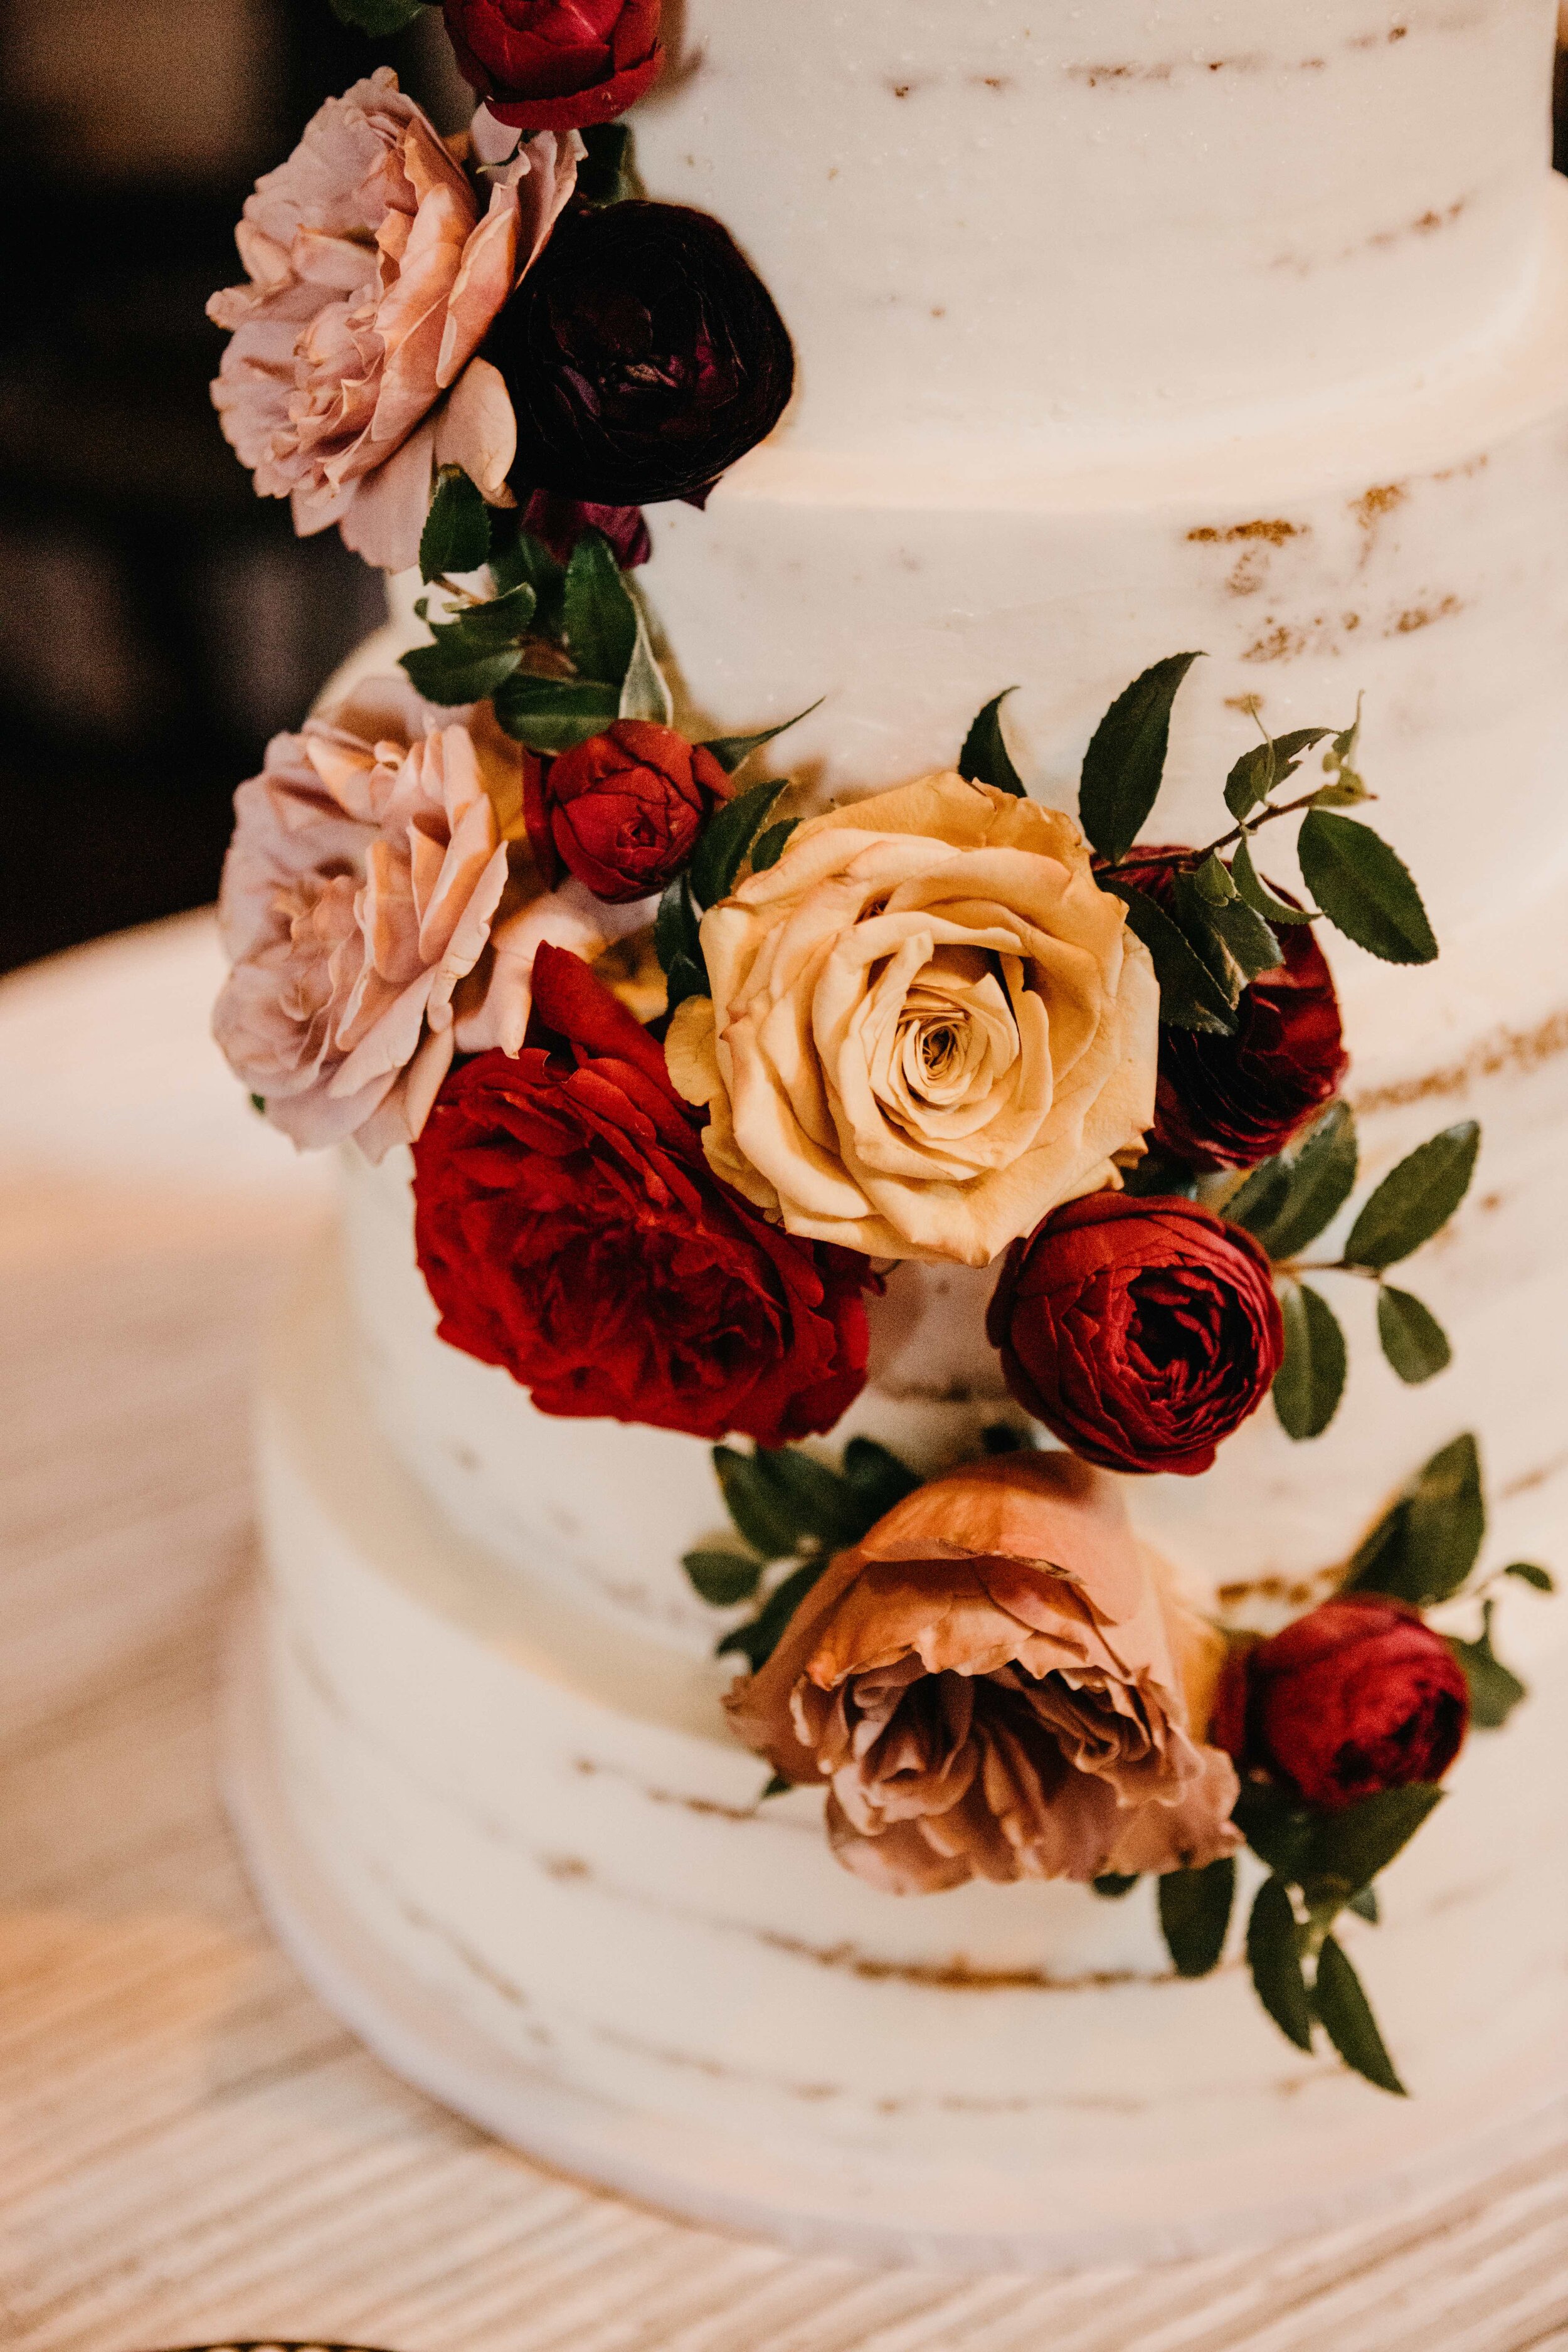 Naked cake with full floral cascade of garden roses in shades of burgundy, golden yellow, and dusty rose pink. Nashville, TN luxury wedding floral design by Rosemary & Finch.